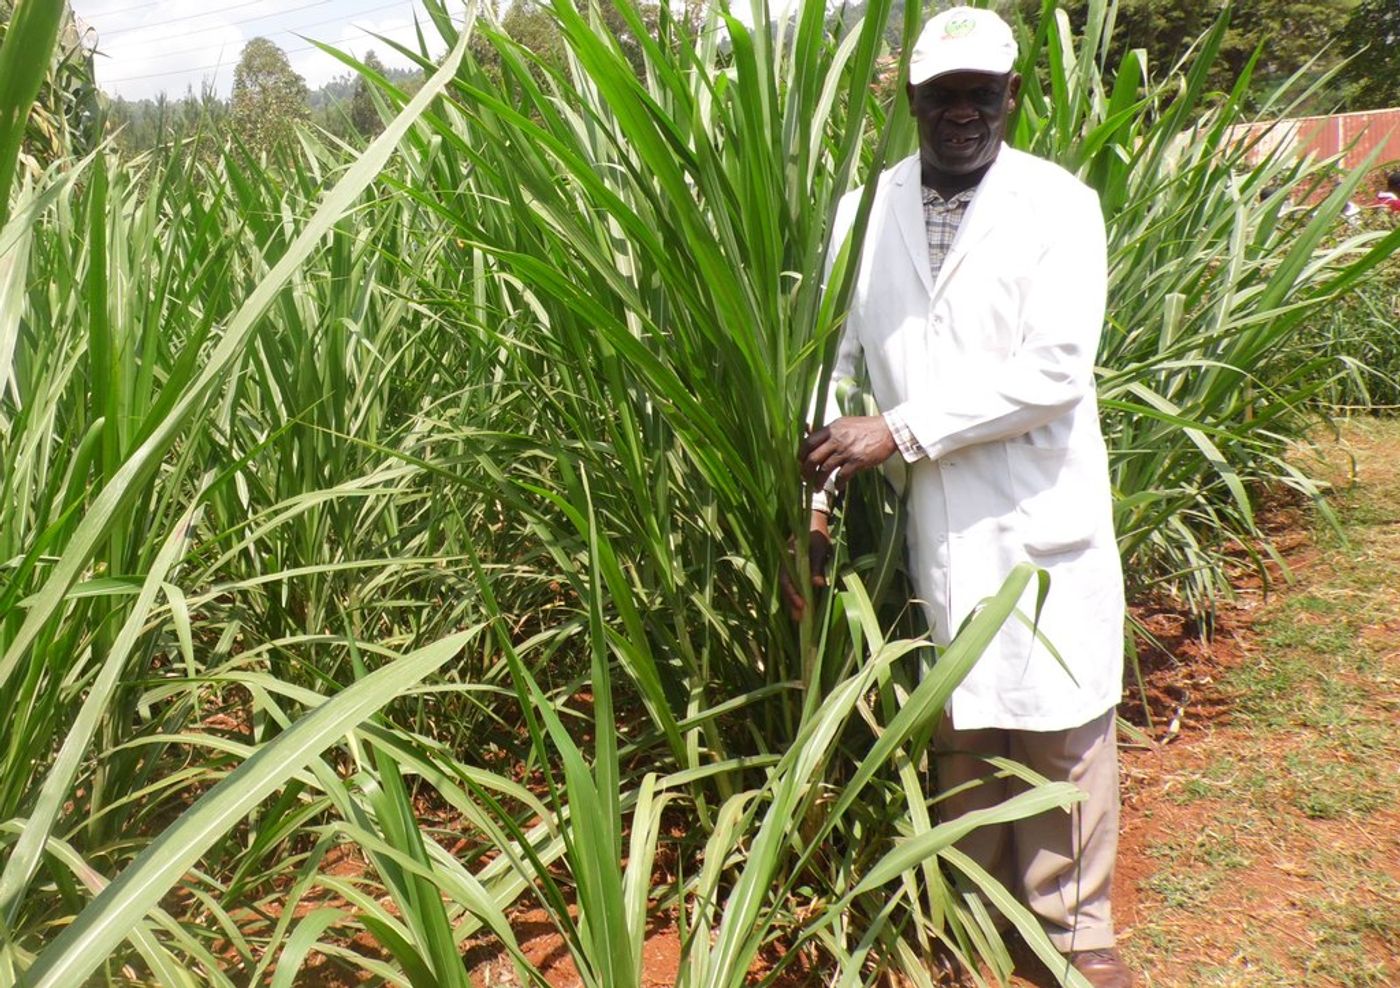 Small dairy farmers could replace cows' diet with Napier grass to reduce greenhouse gas emissions. Photo: farmbizafrica.com